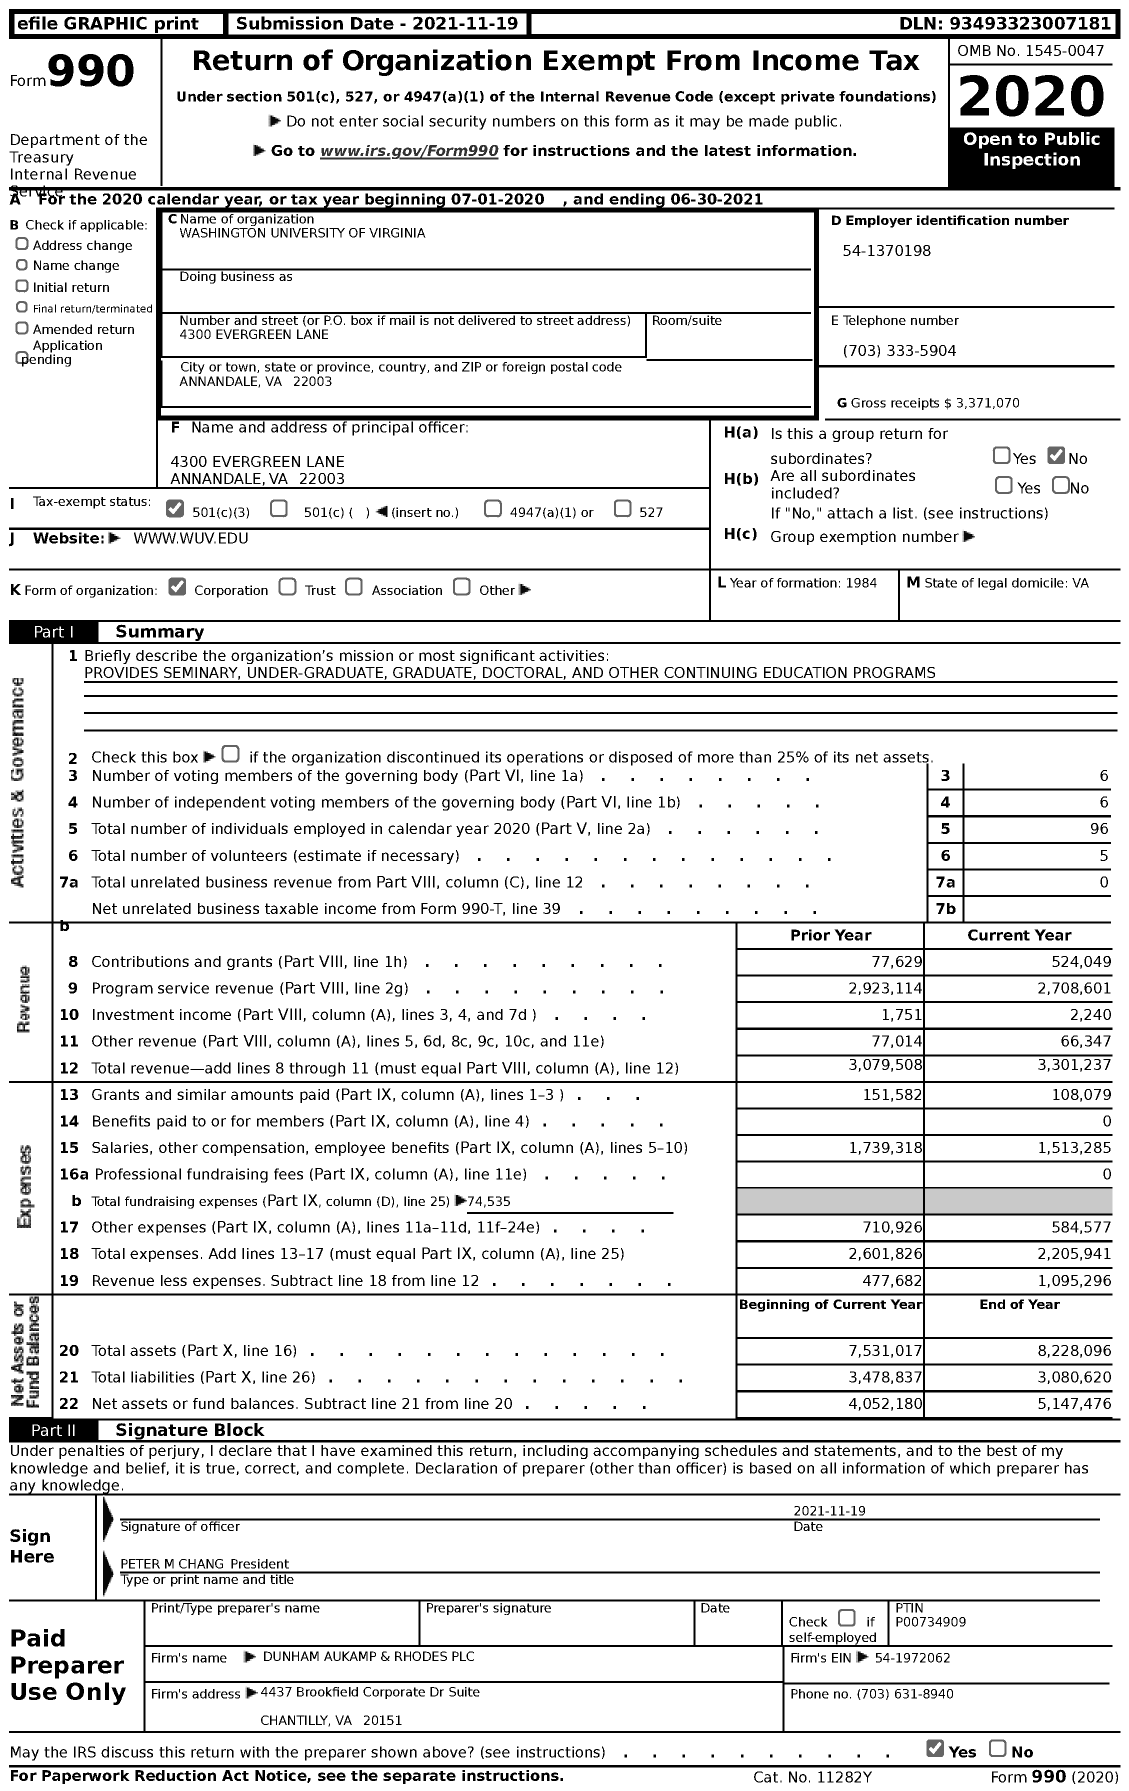 Image of first page of 2020 Form 990 for Washington University of Virginia (WUV)